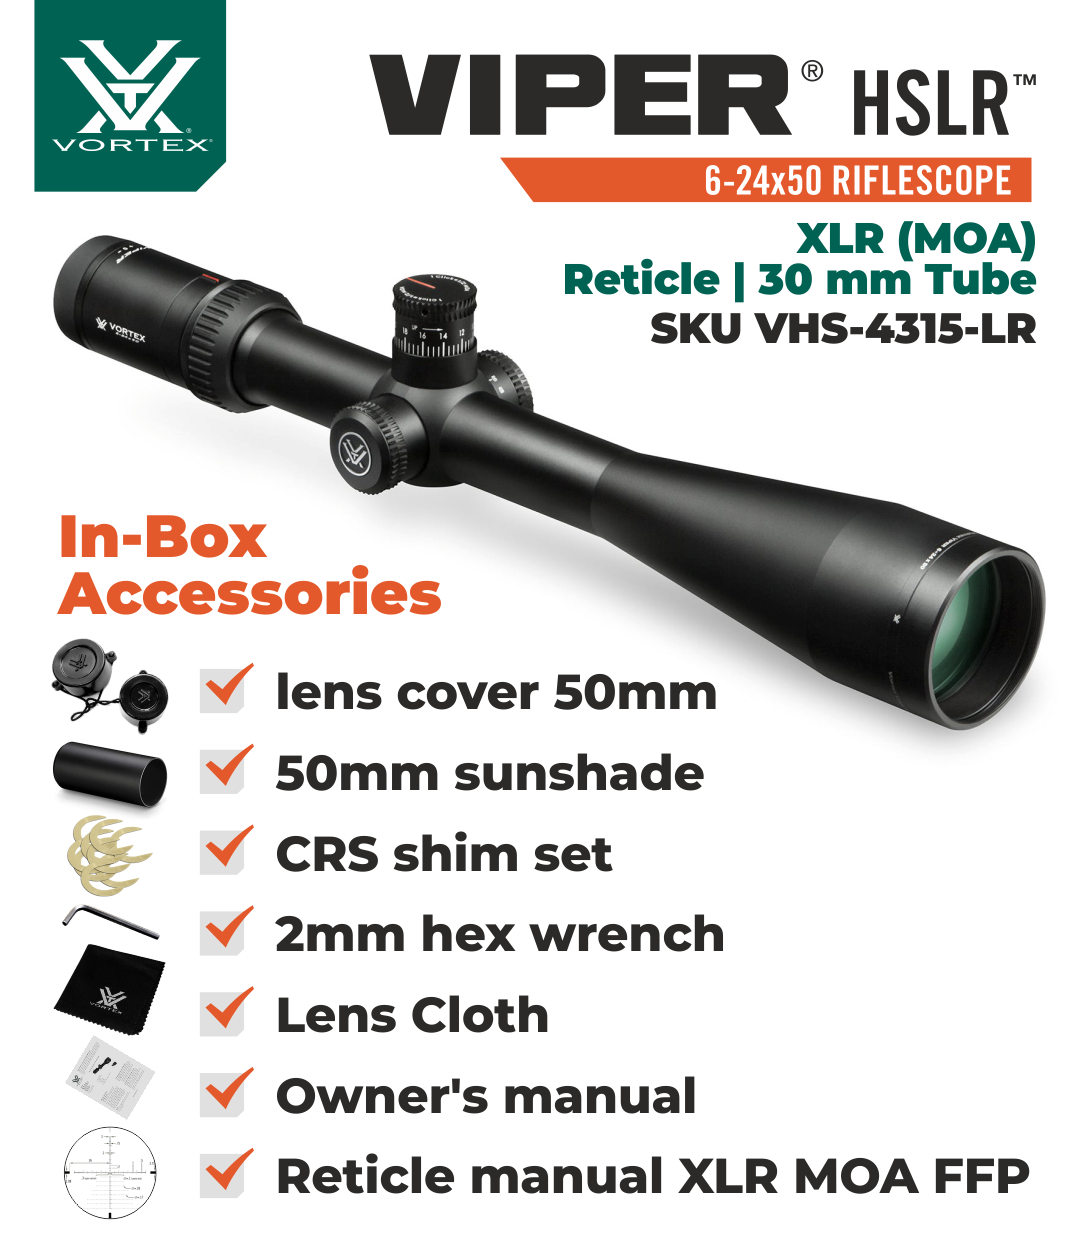 Vortex Optics Viper HSLR 6-24X50 XLR (MOA) FFP, 30 mm Tube with Pro 30mm High Rings (1.18in) and Free Hat Bundle - image 4 of 7